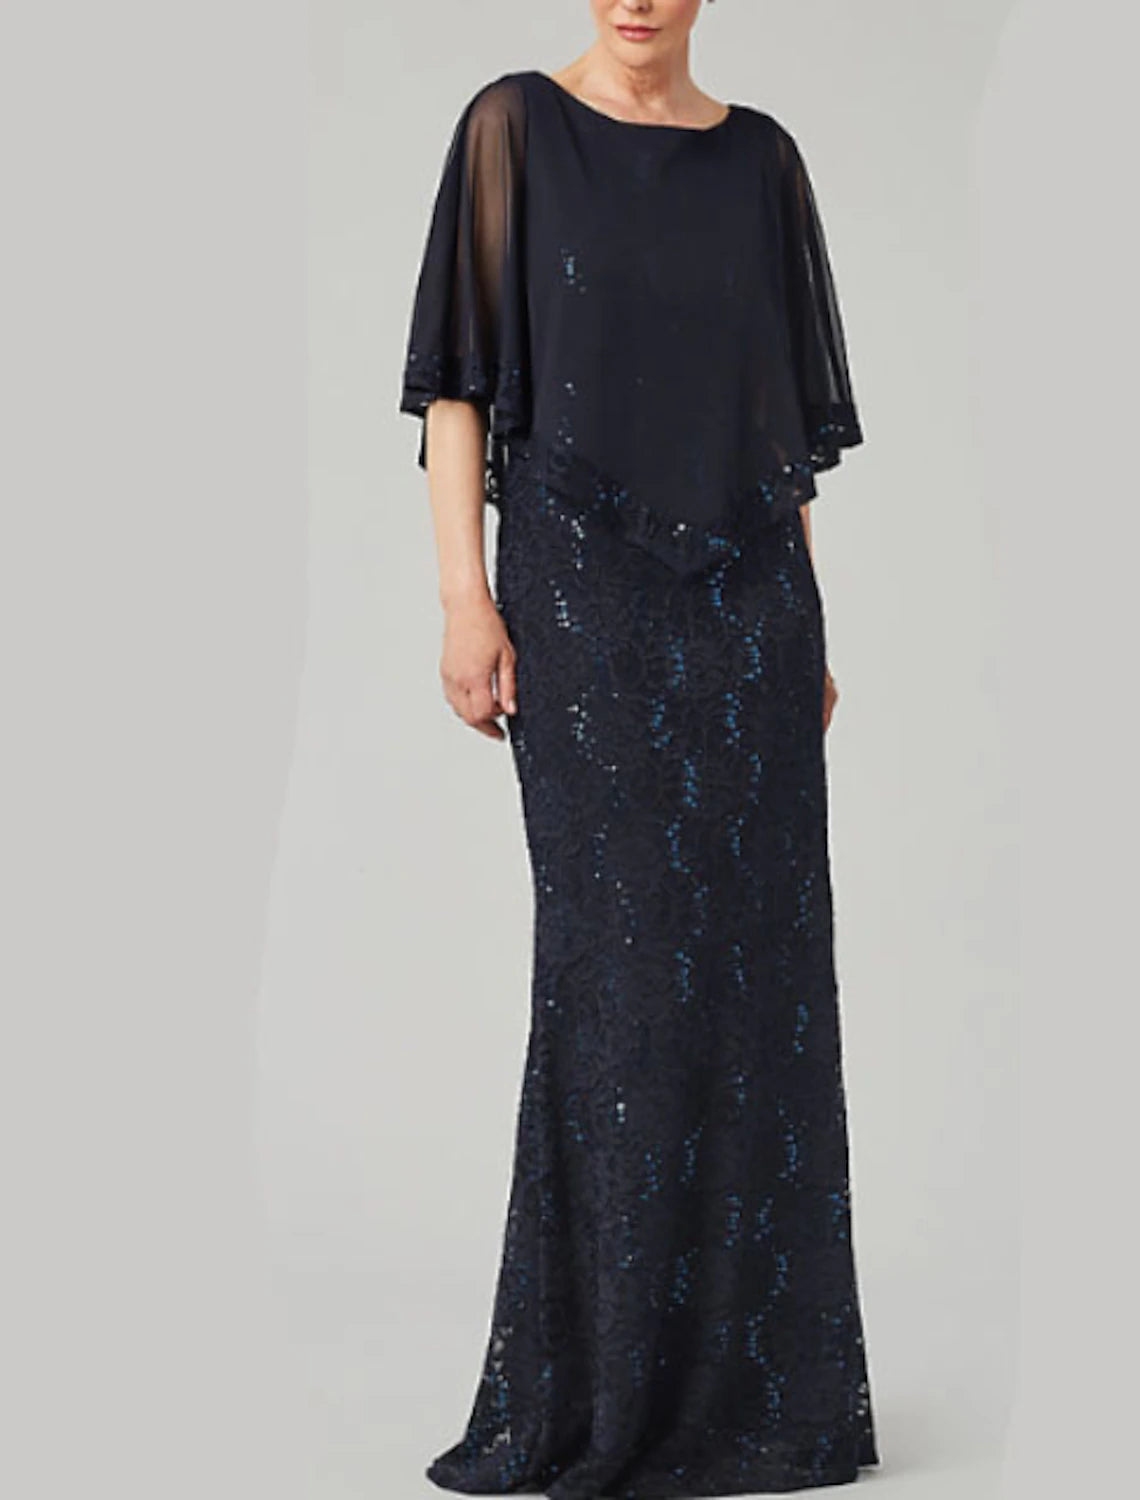 Sheath / Column Mother of the Bride Dress Wedding Guest Elegant & Luxurious Jewel Neck Floor Length Chiffon Half Sleeve with Lace Beading Embroidery Fall